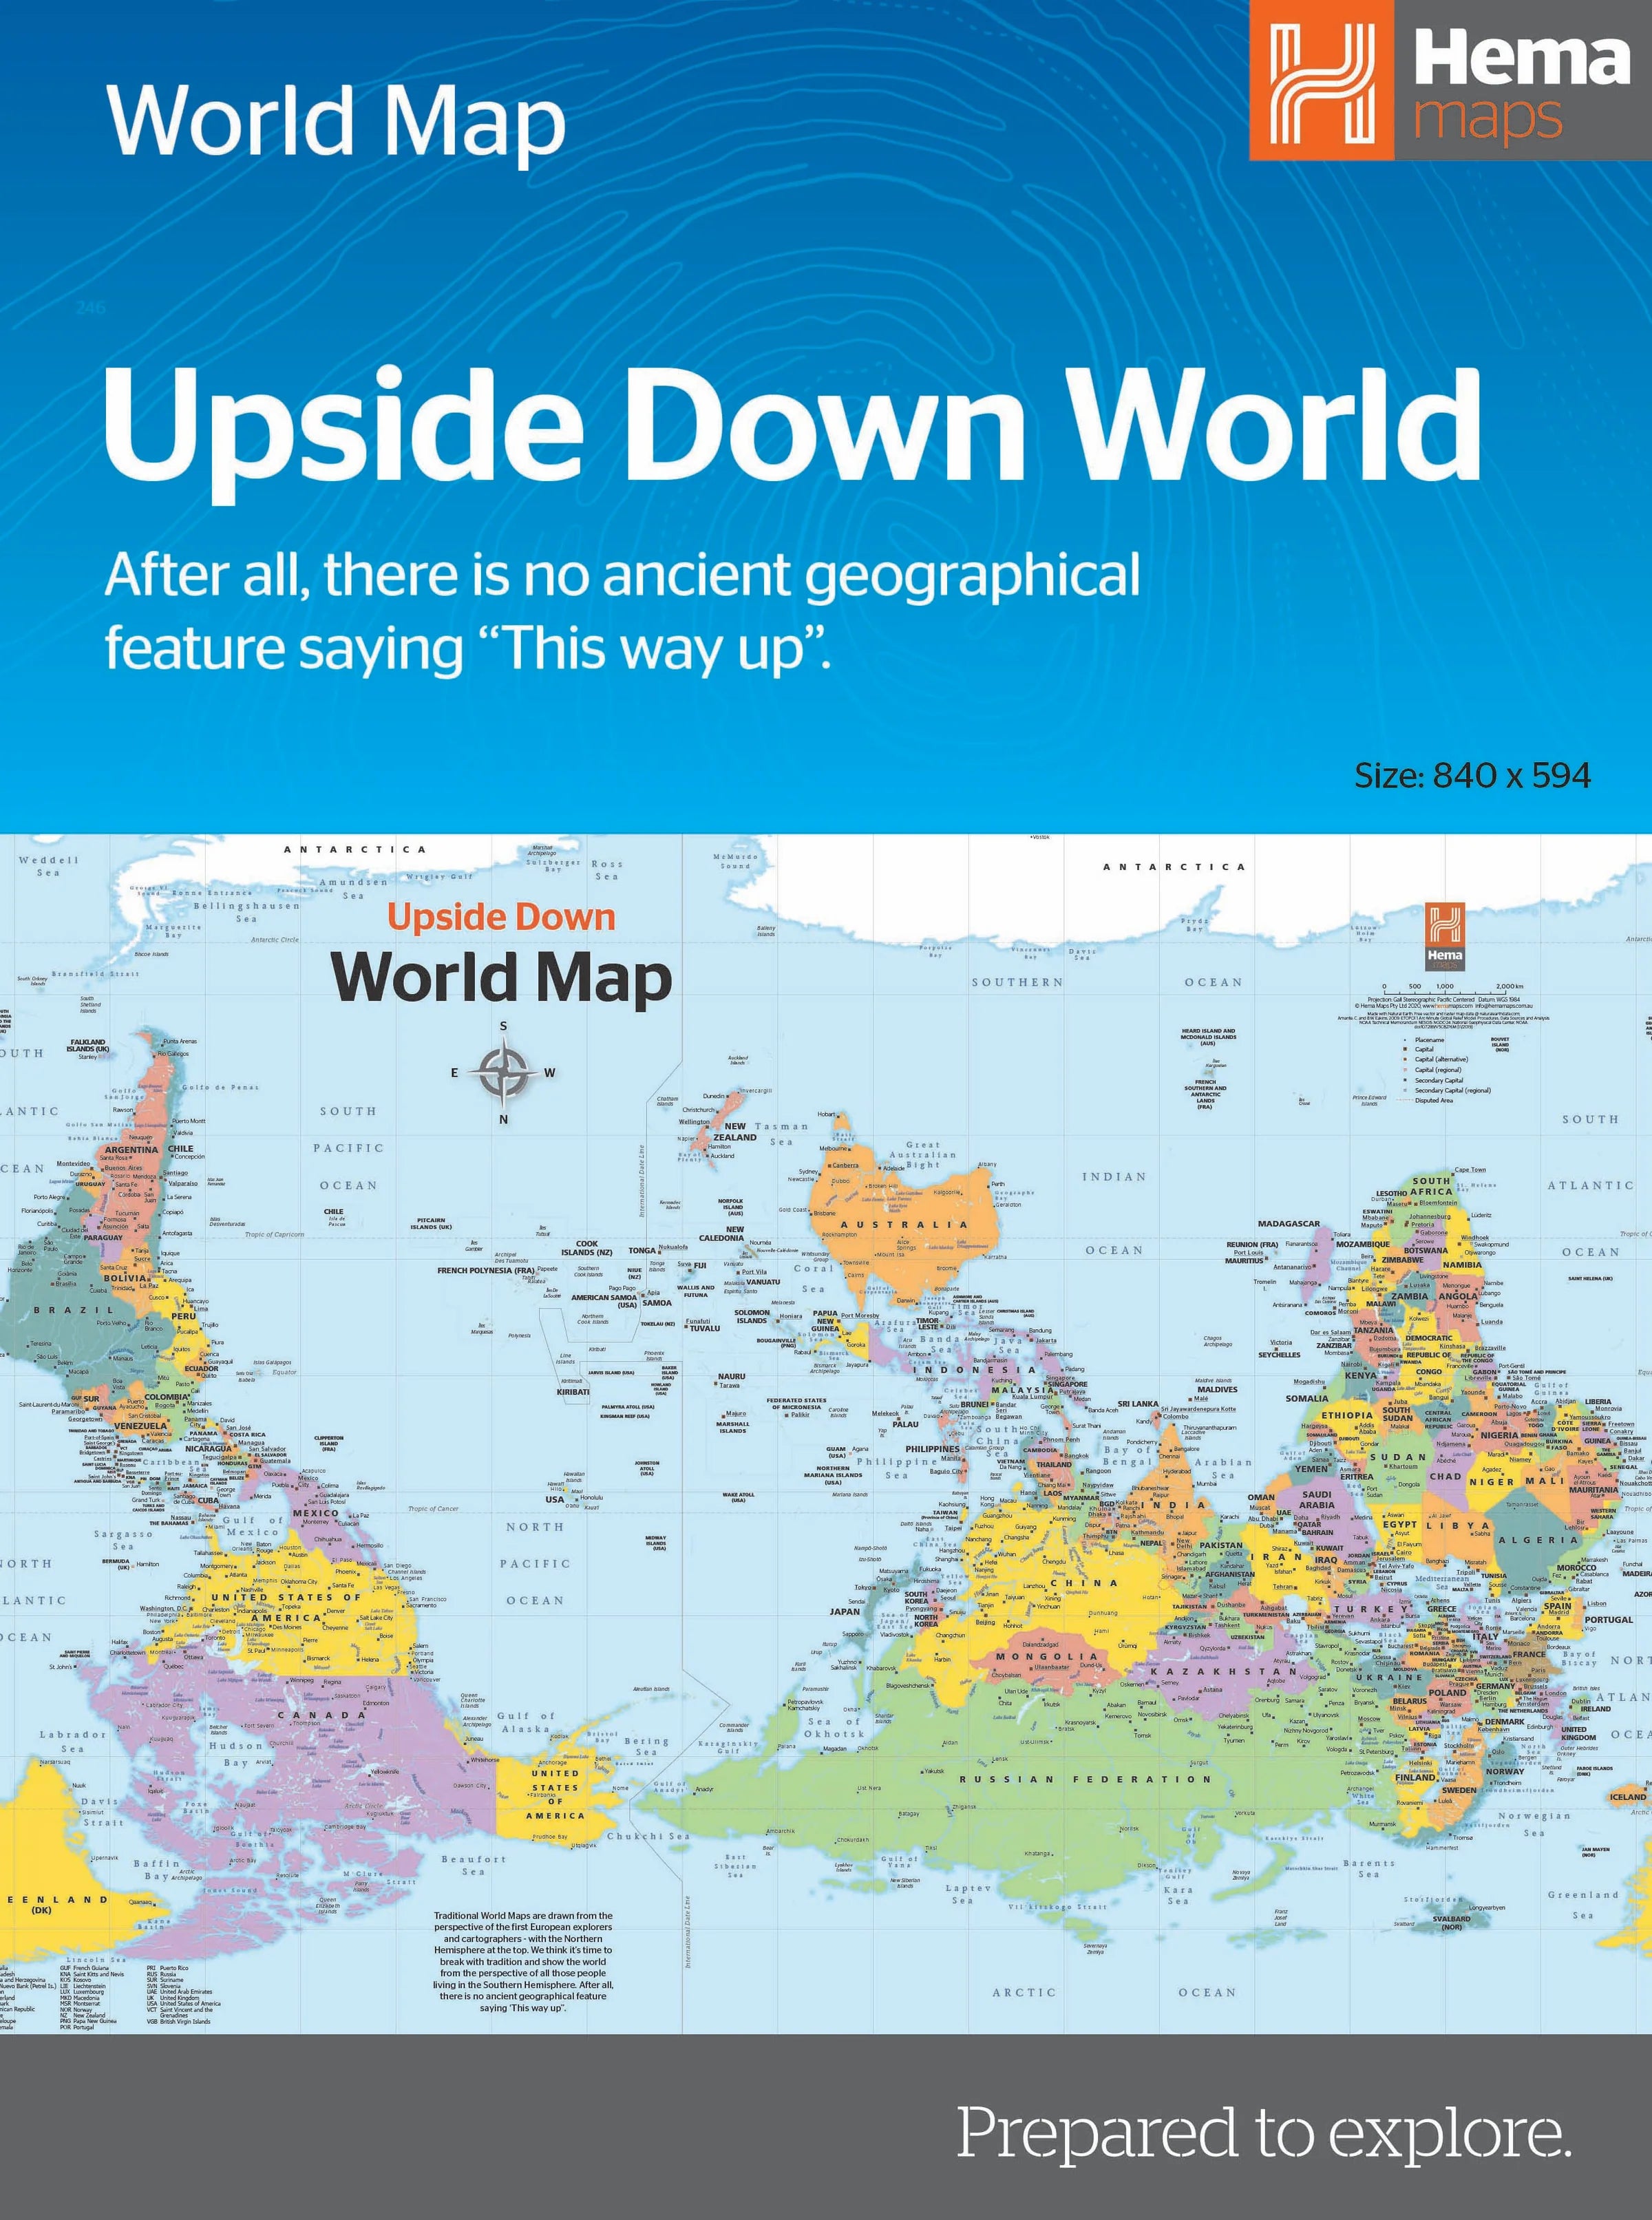 Upside Down World Map Folded in Envelope (2nd Edition) by Hema Maps